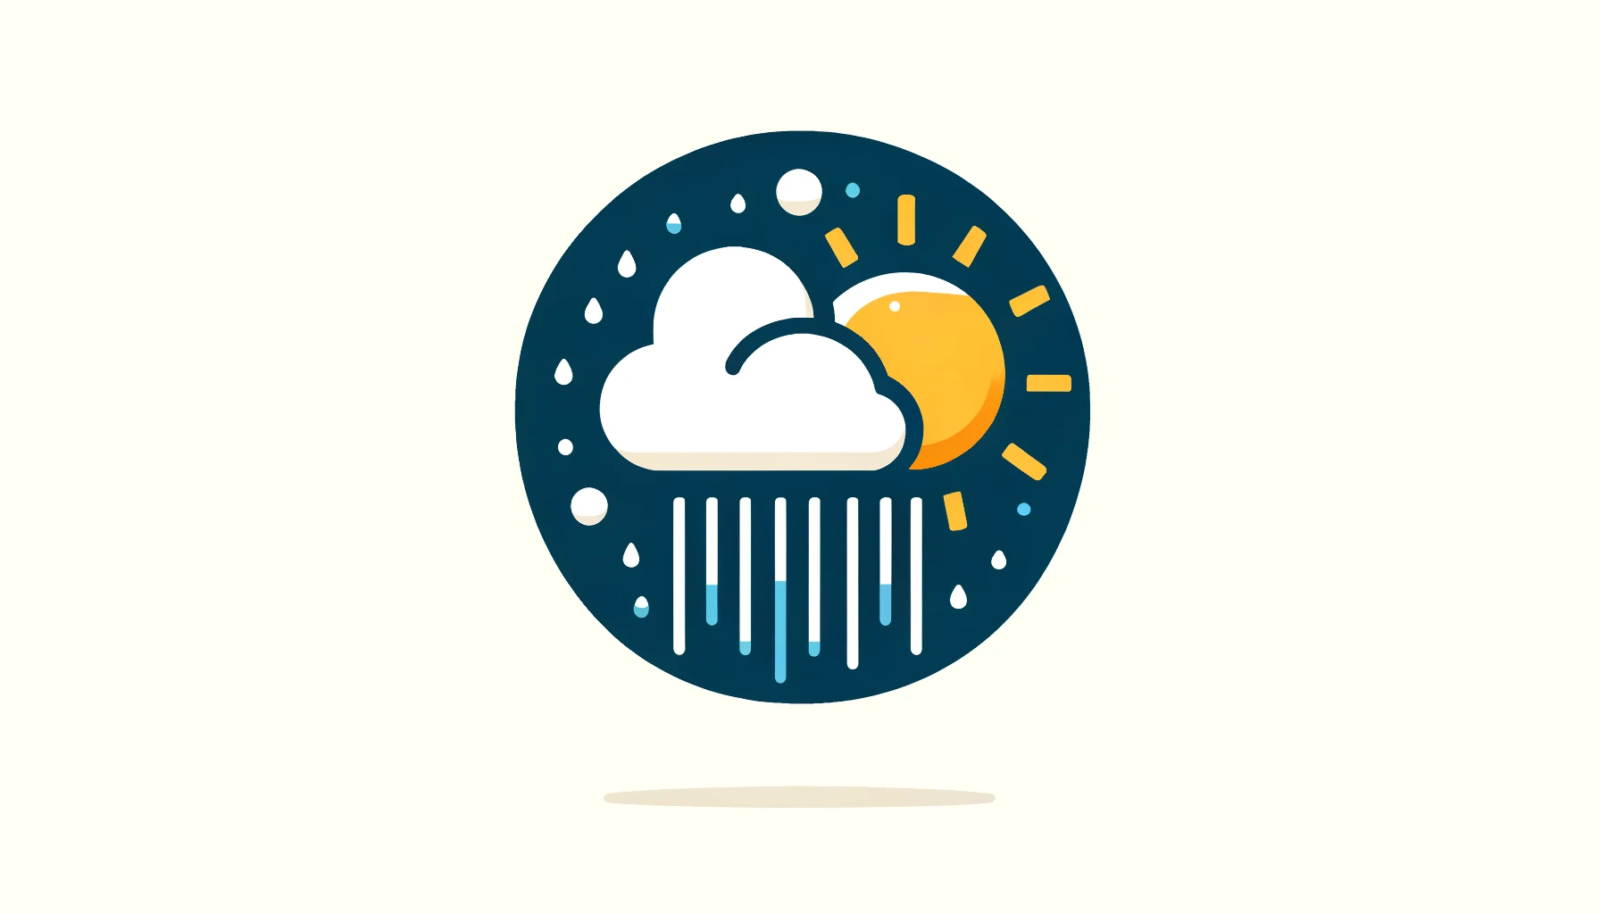 Symbol of variable weather with clouds, light rain and sun